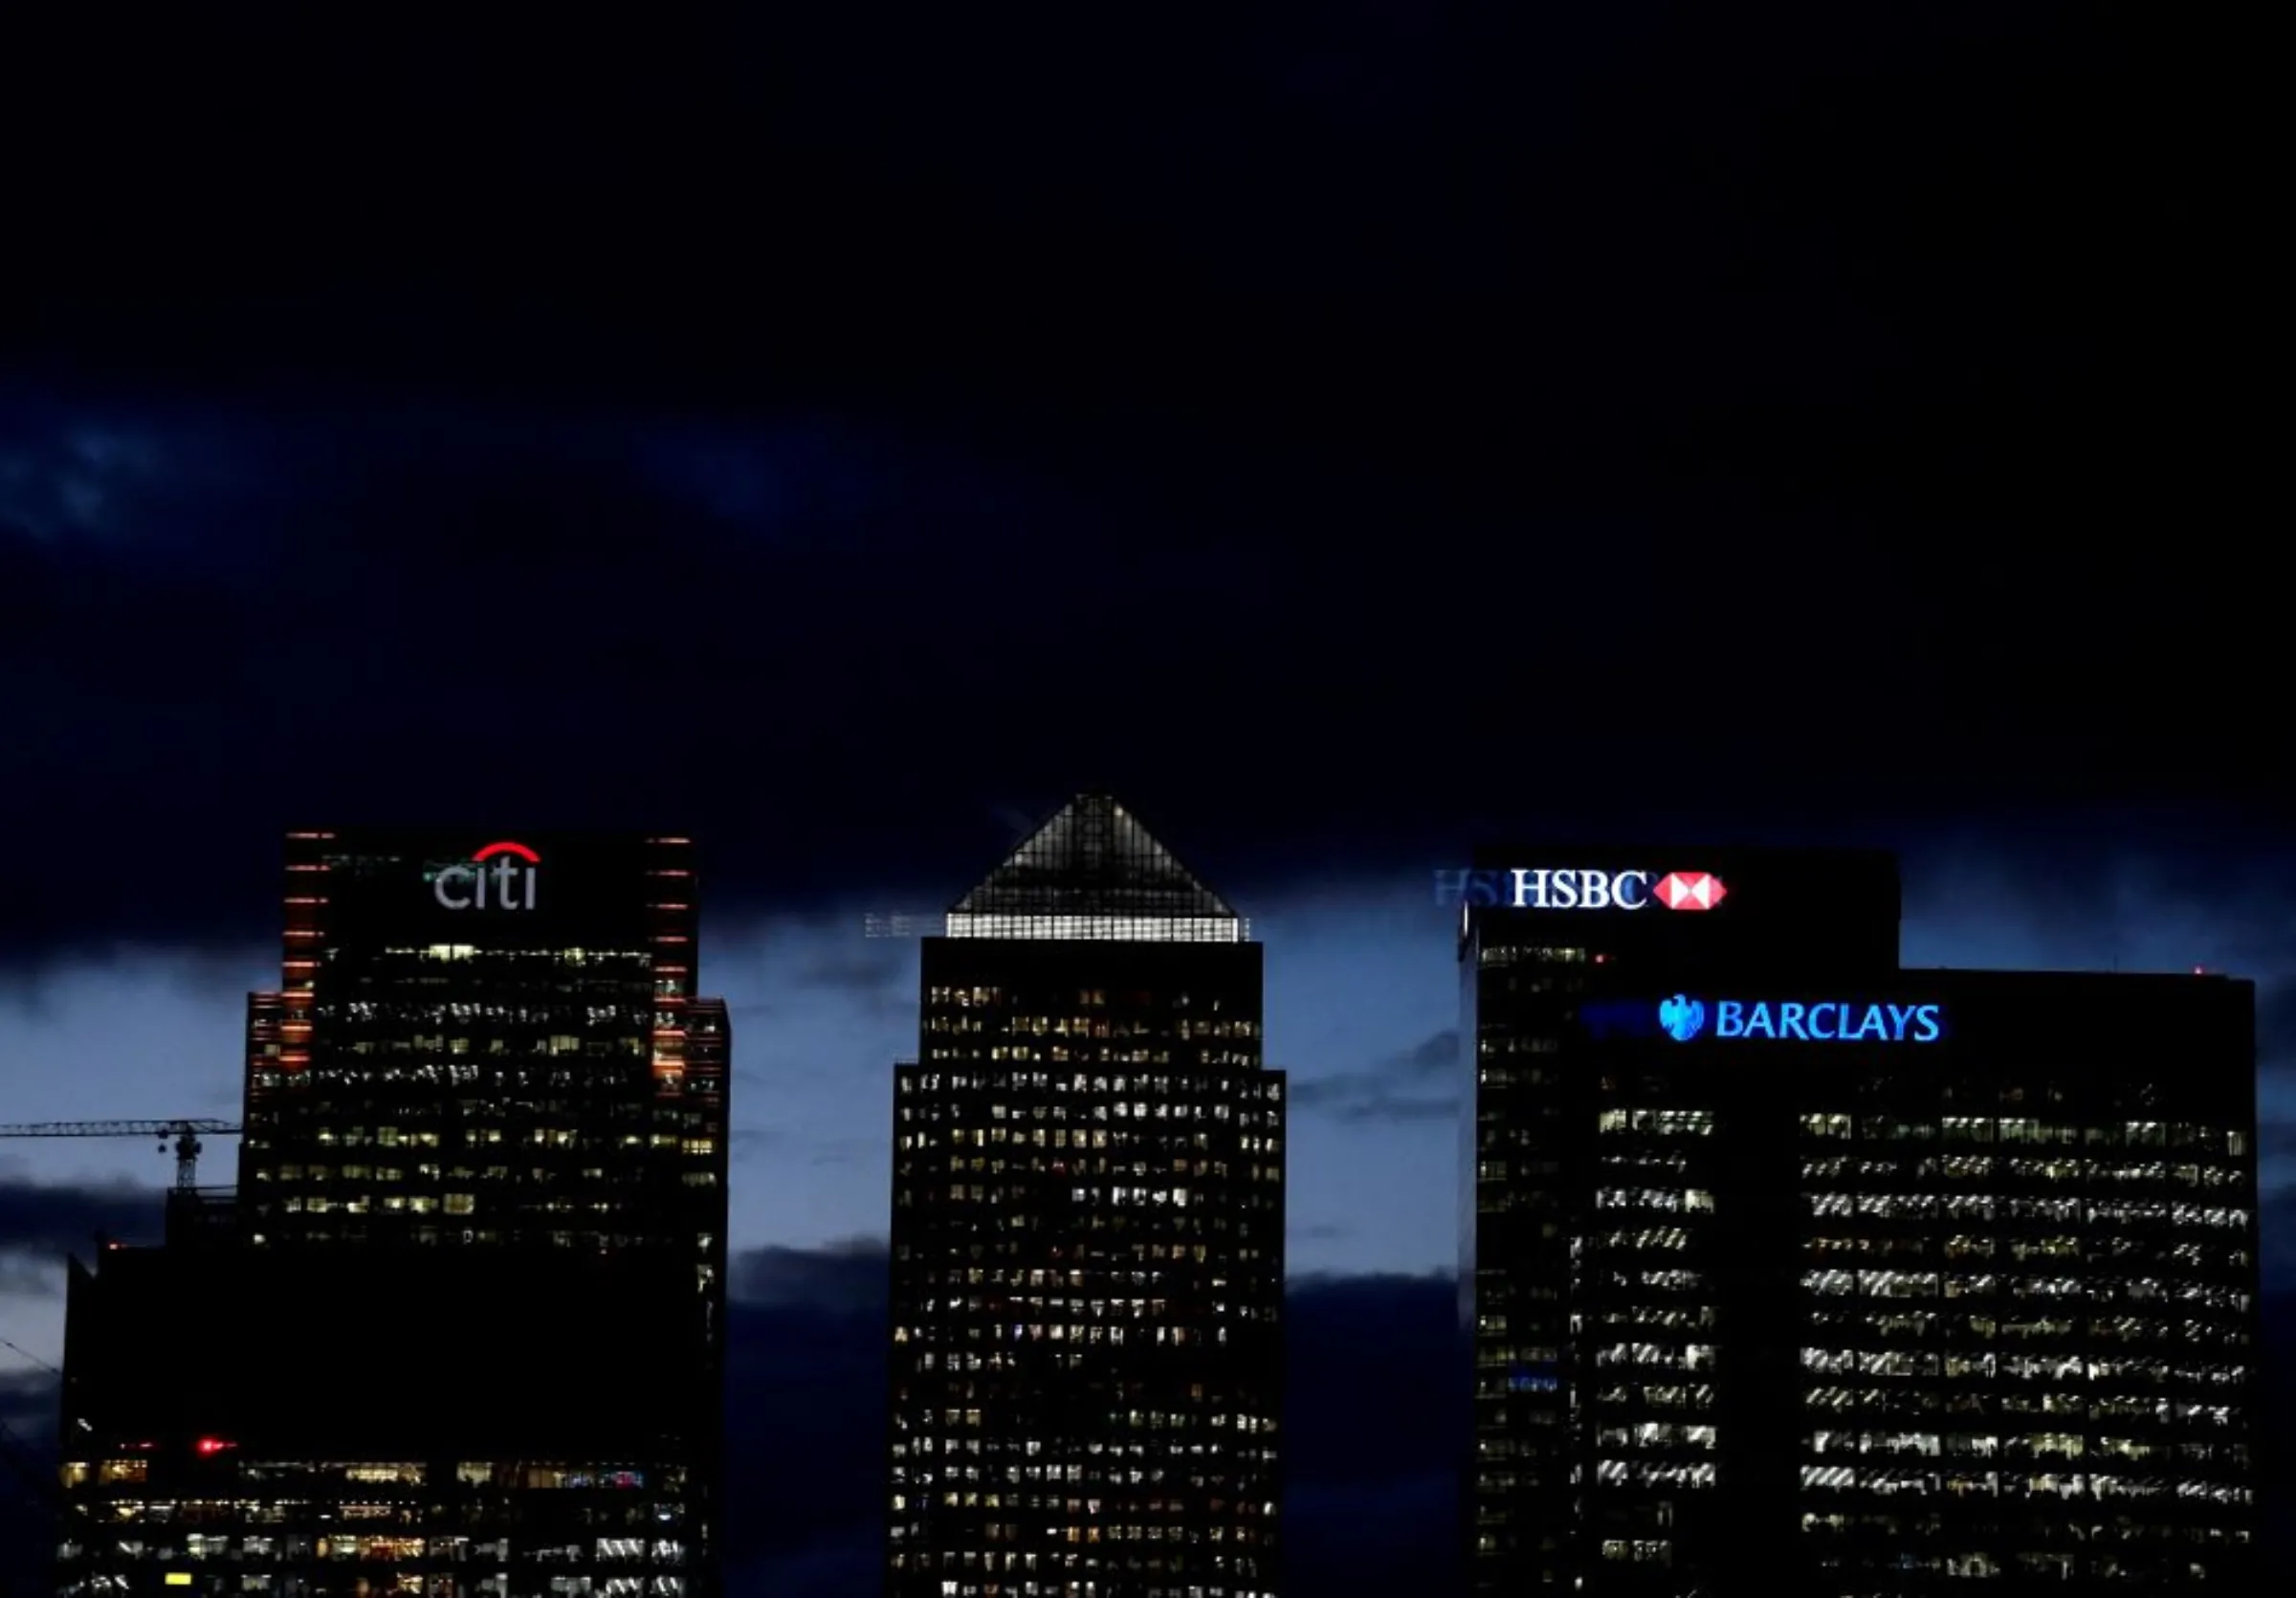 Citibank, HSBC and Barclays buildings are lit up at dusk in the Canary Wharf financial district of London, Britain, November 19, 2018. REUTERS/Toby Melville